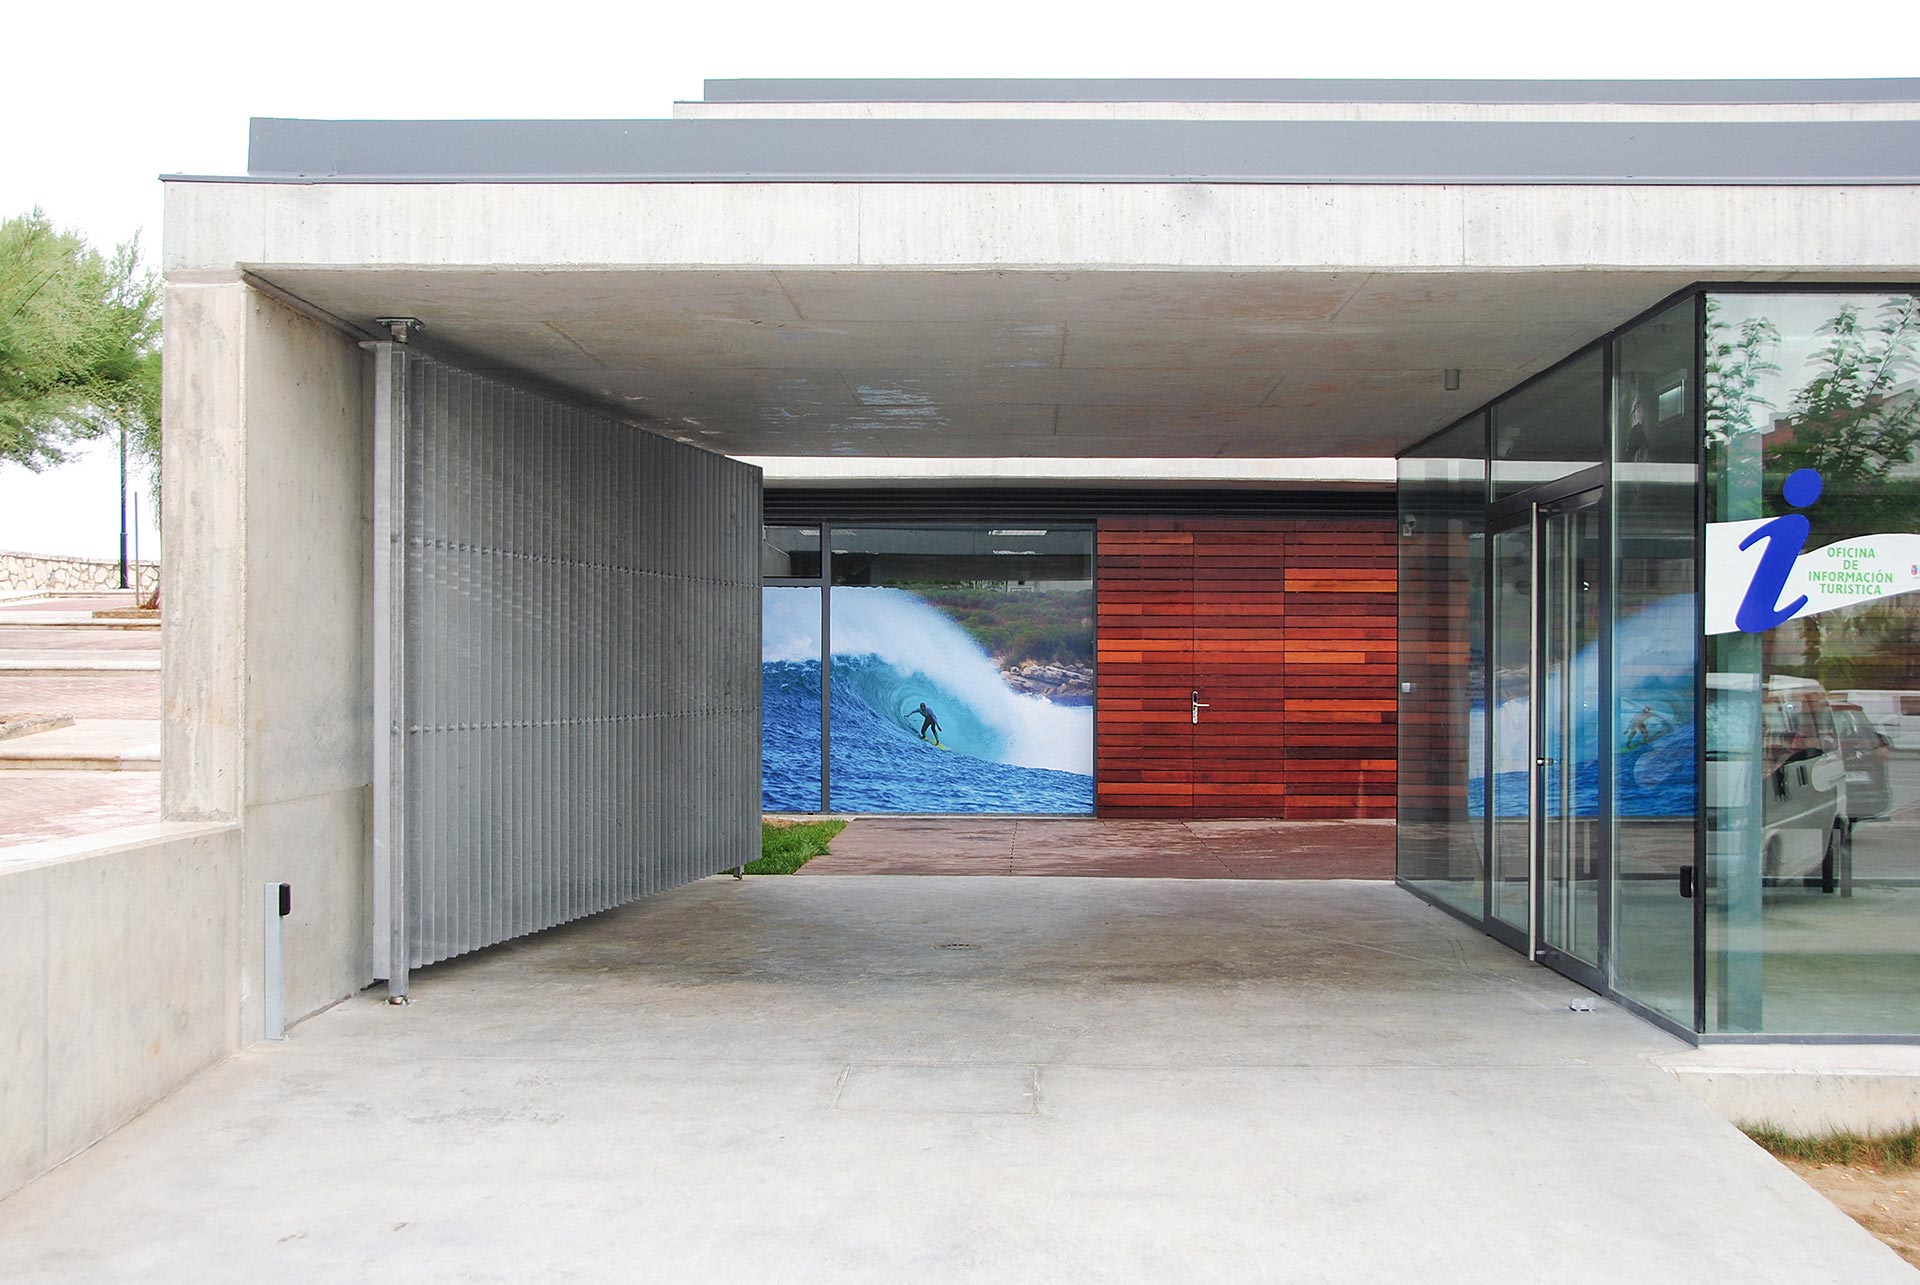 Main entrance with steel door of Surf Center designed by Moah Architects in Somo